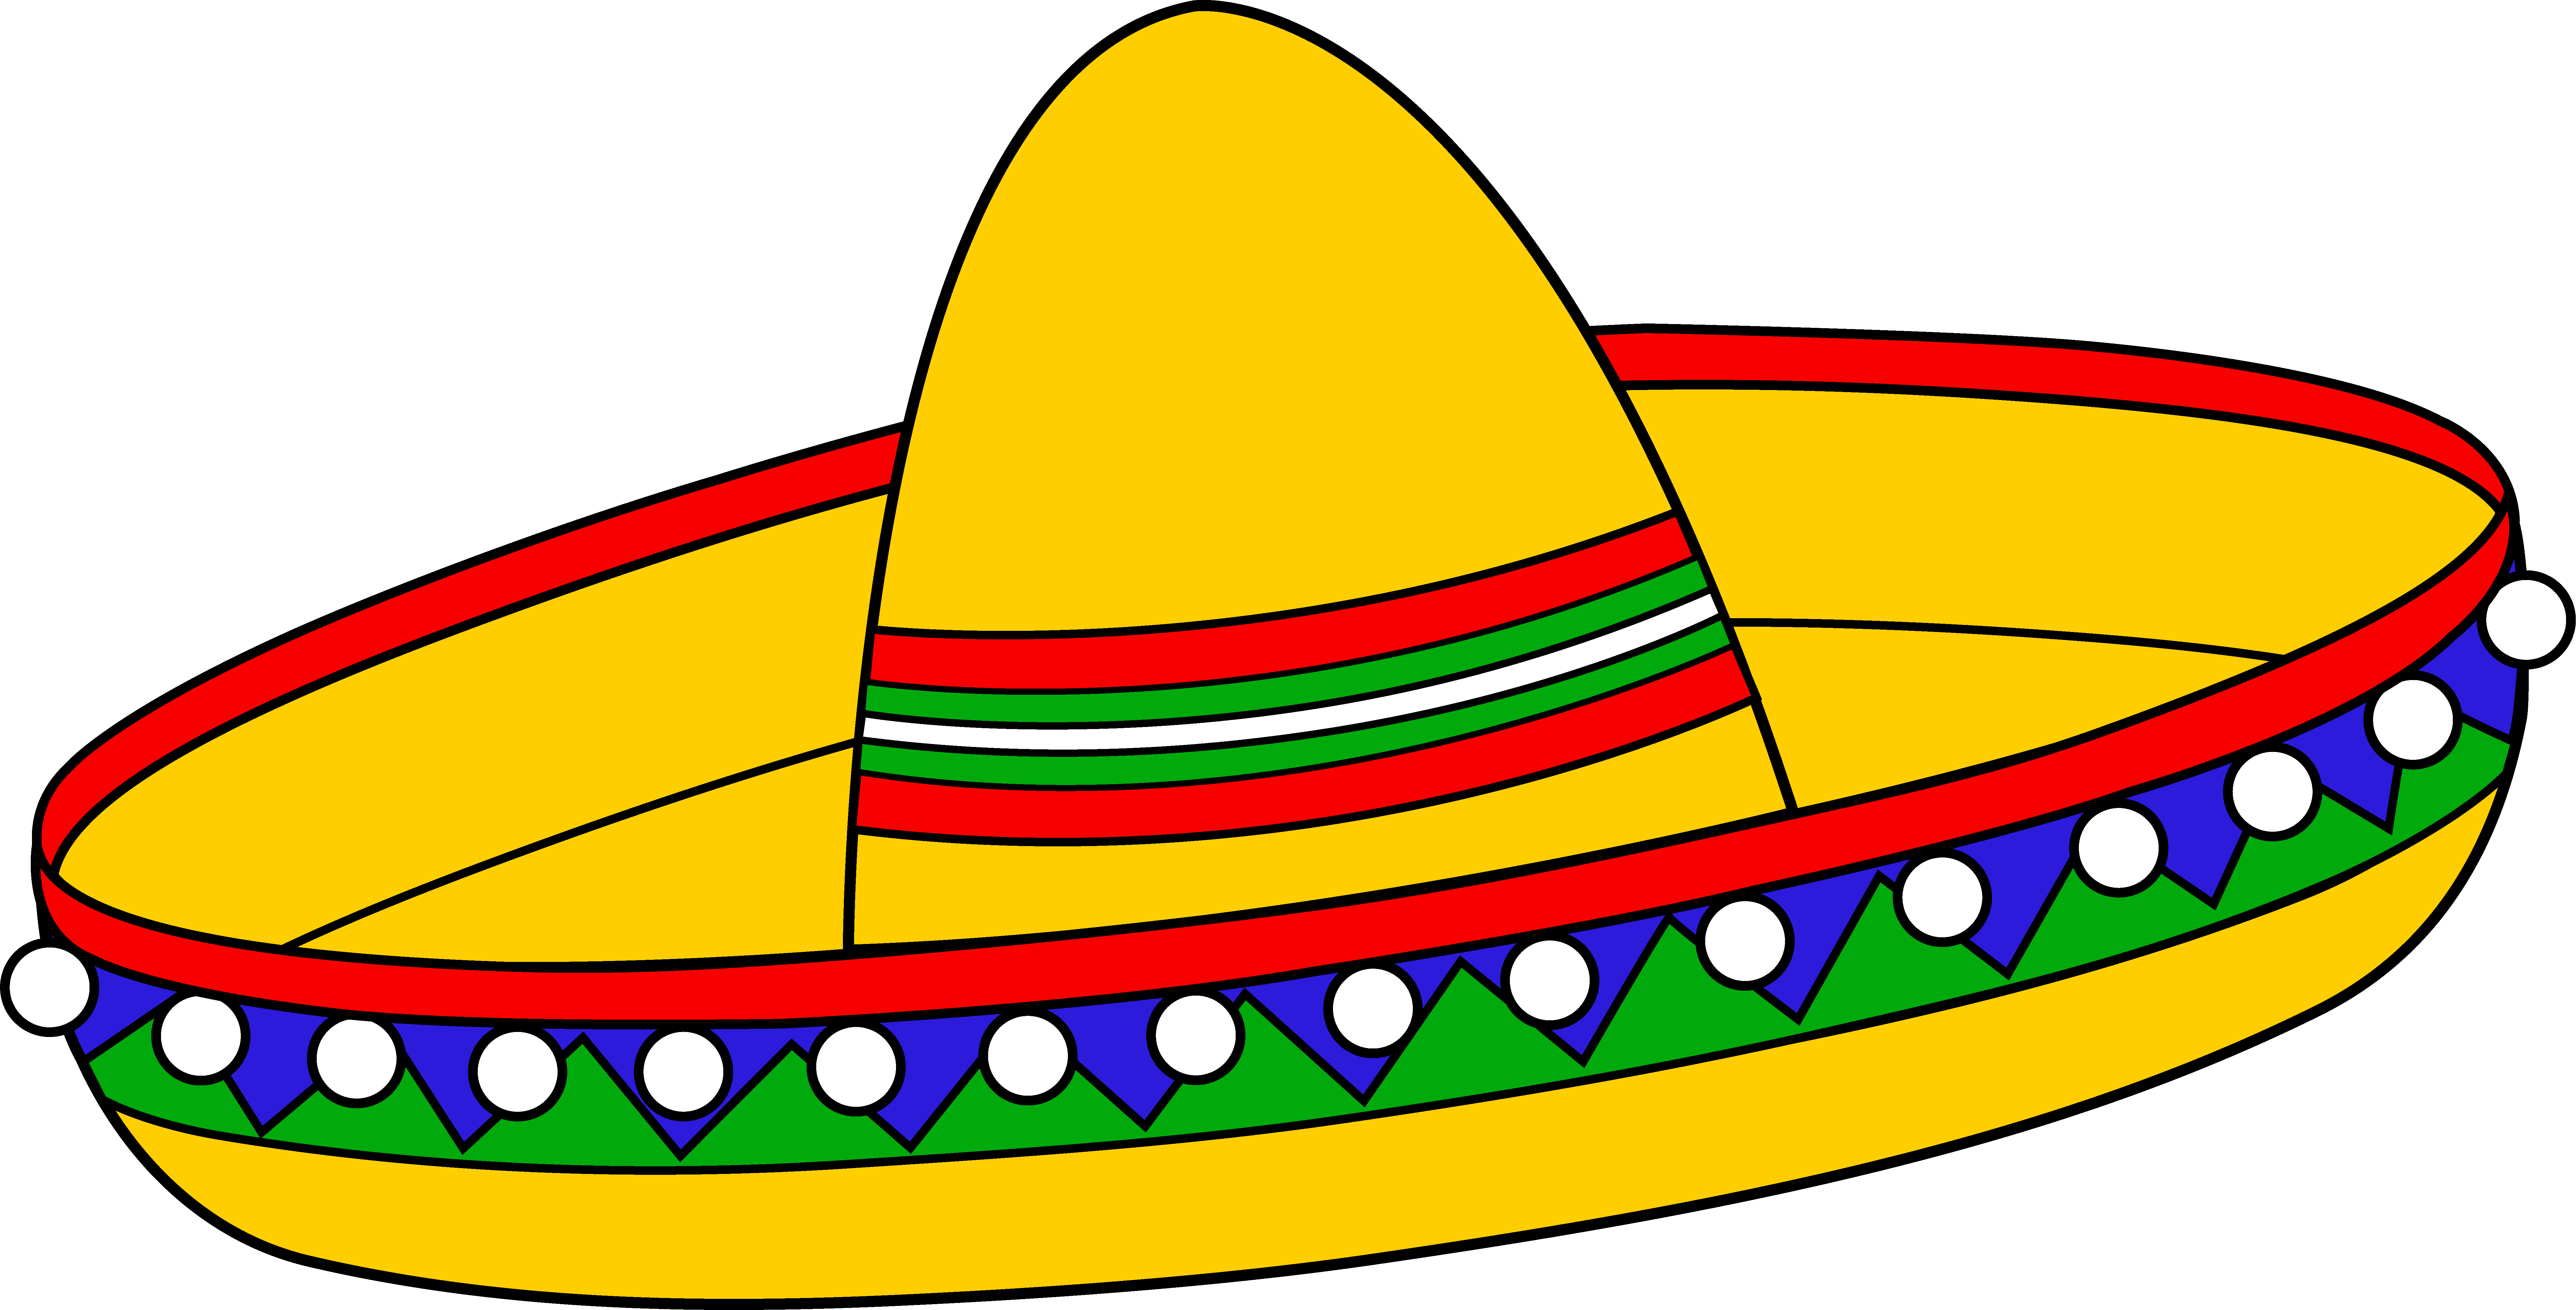 Clipart door colourful. Colorful mexican sombrero hat